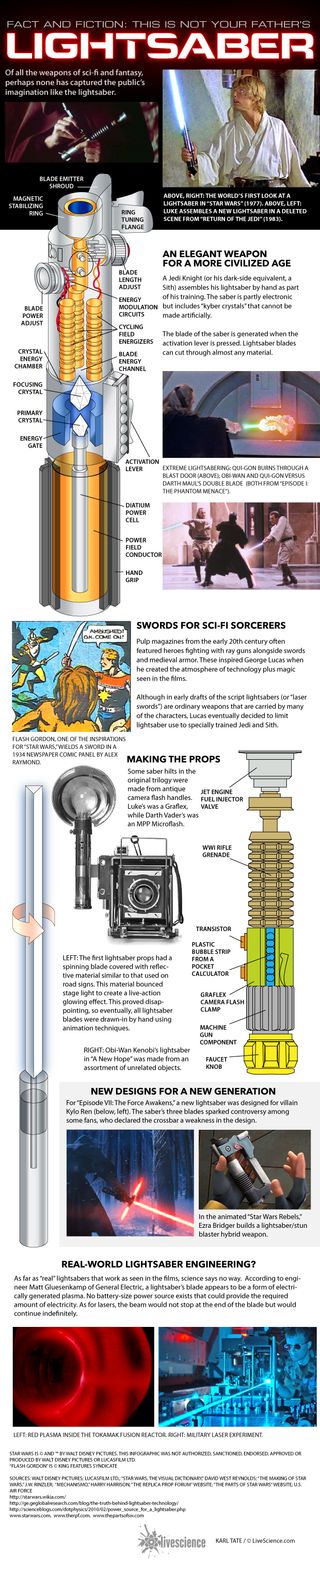 Facts about how "Star Wars" lightsabers work.